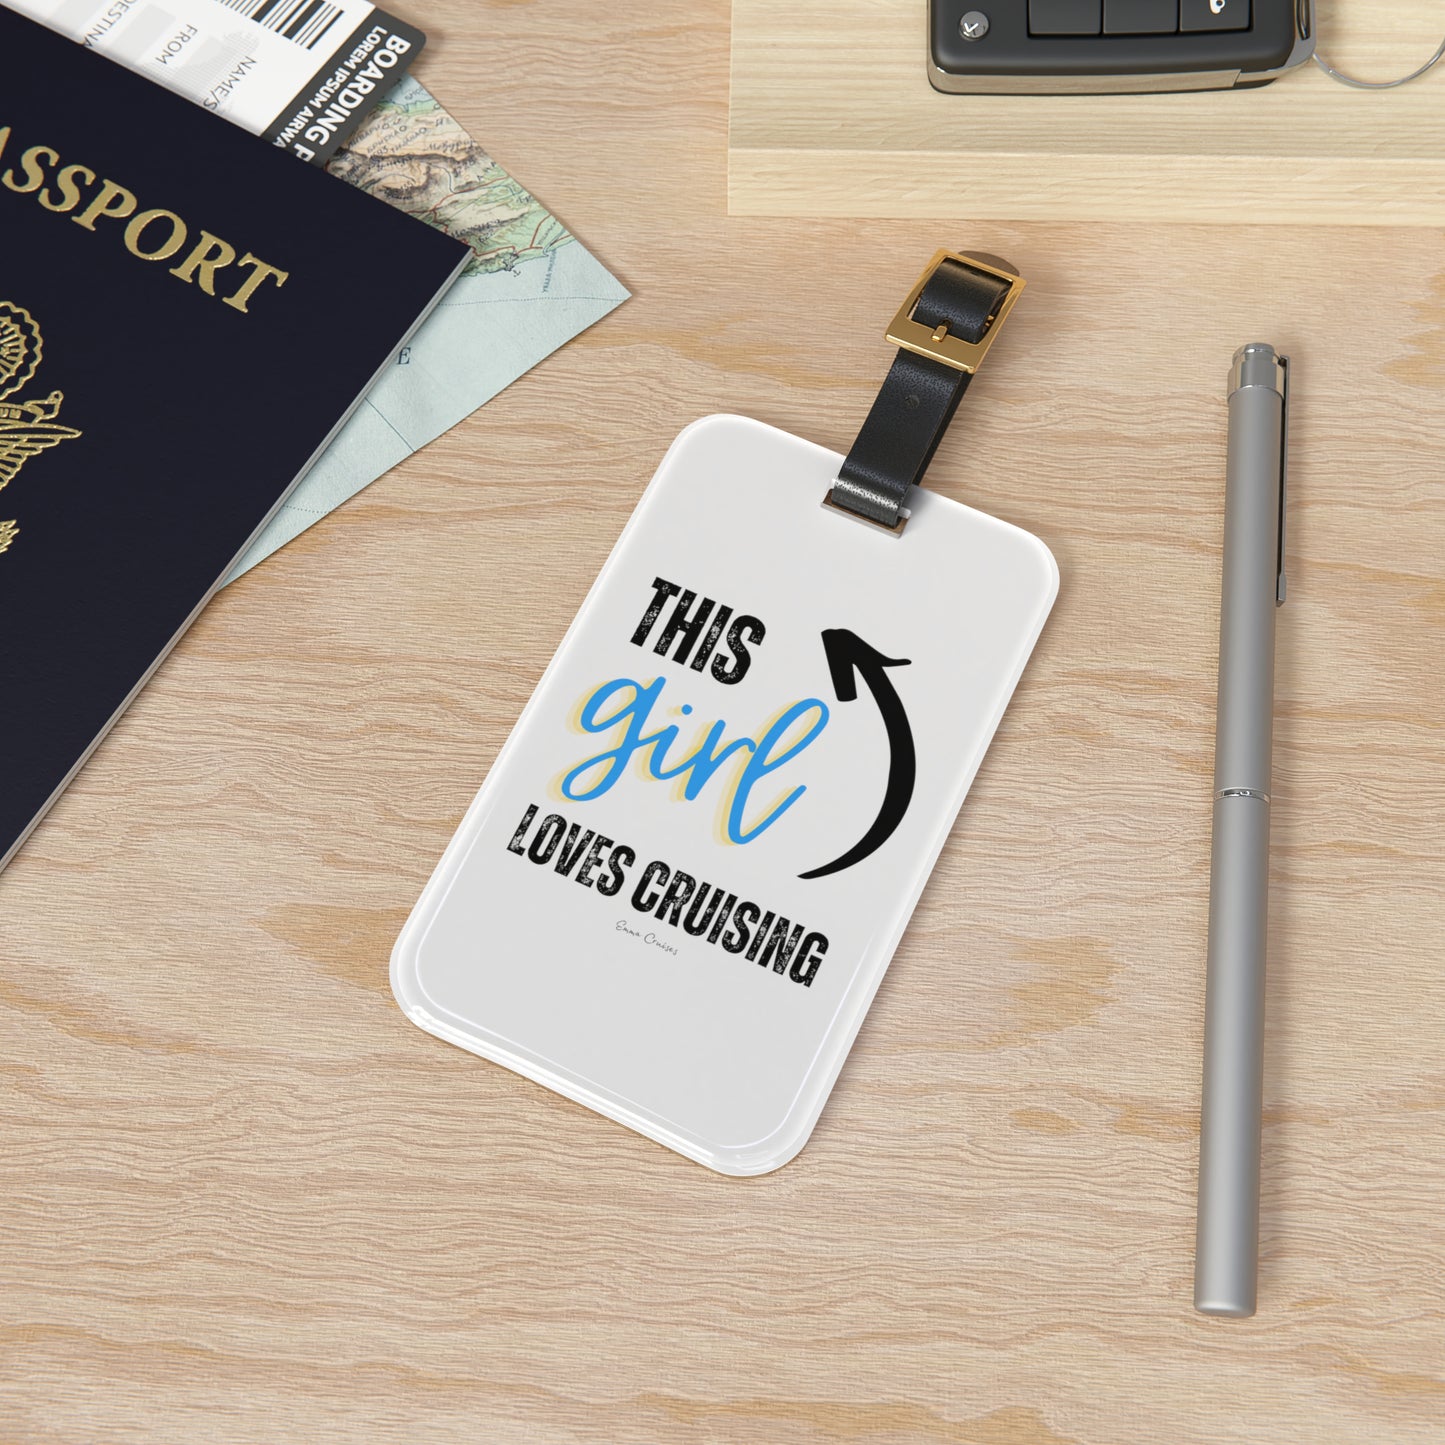 This Girl Loves Cruising - Luggage Tag